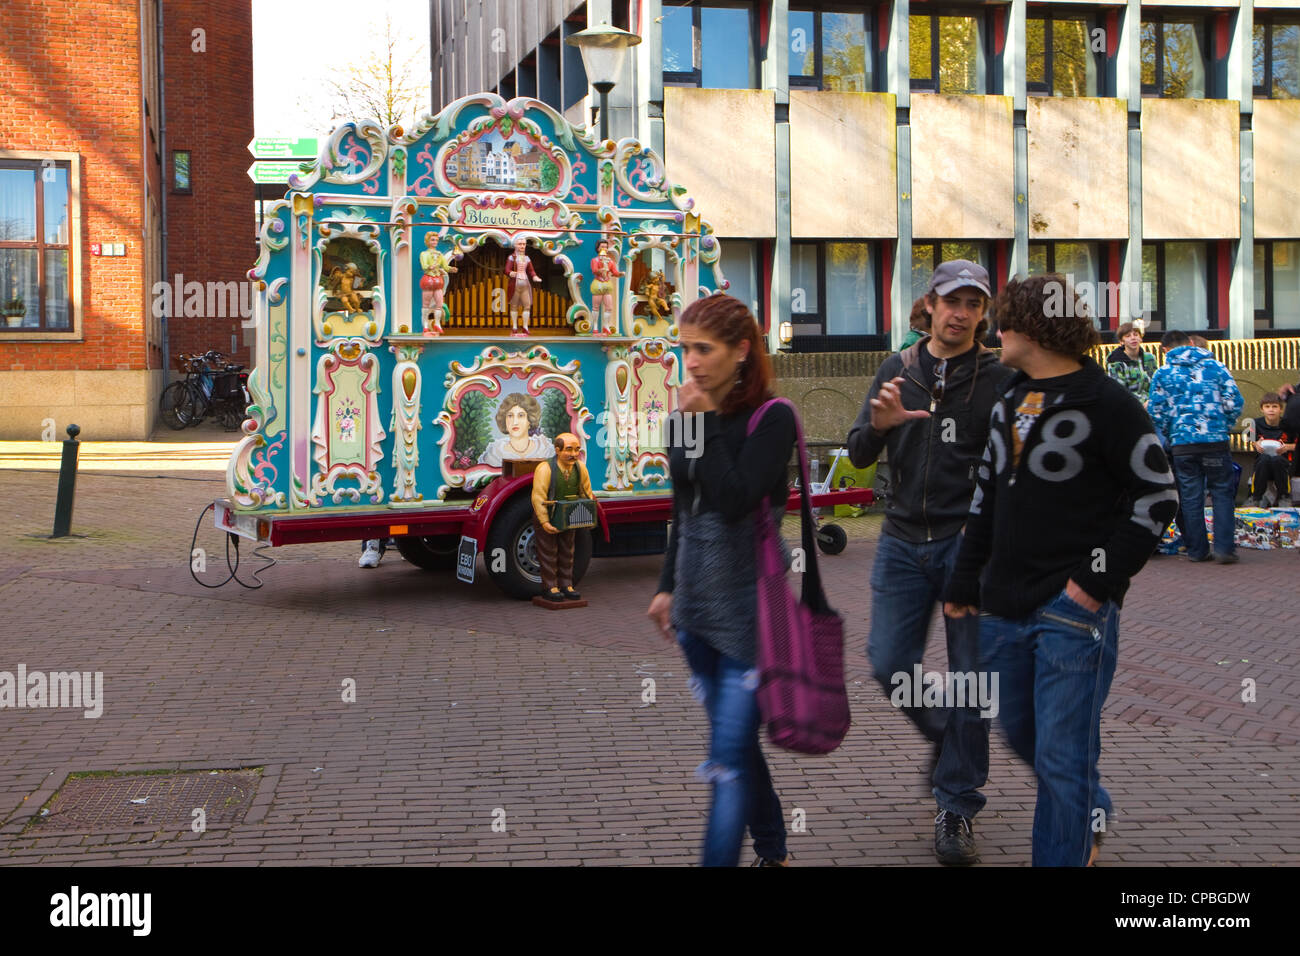 2012, 30 April - Barrel-organ playing music in the street on Queensday in Vlaardingen, the netherlands Stock Photo